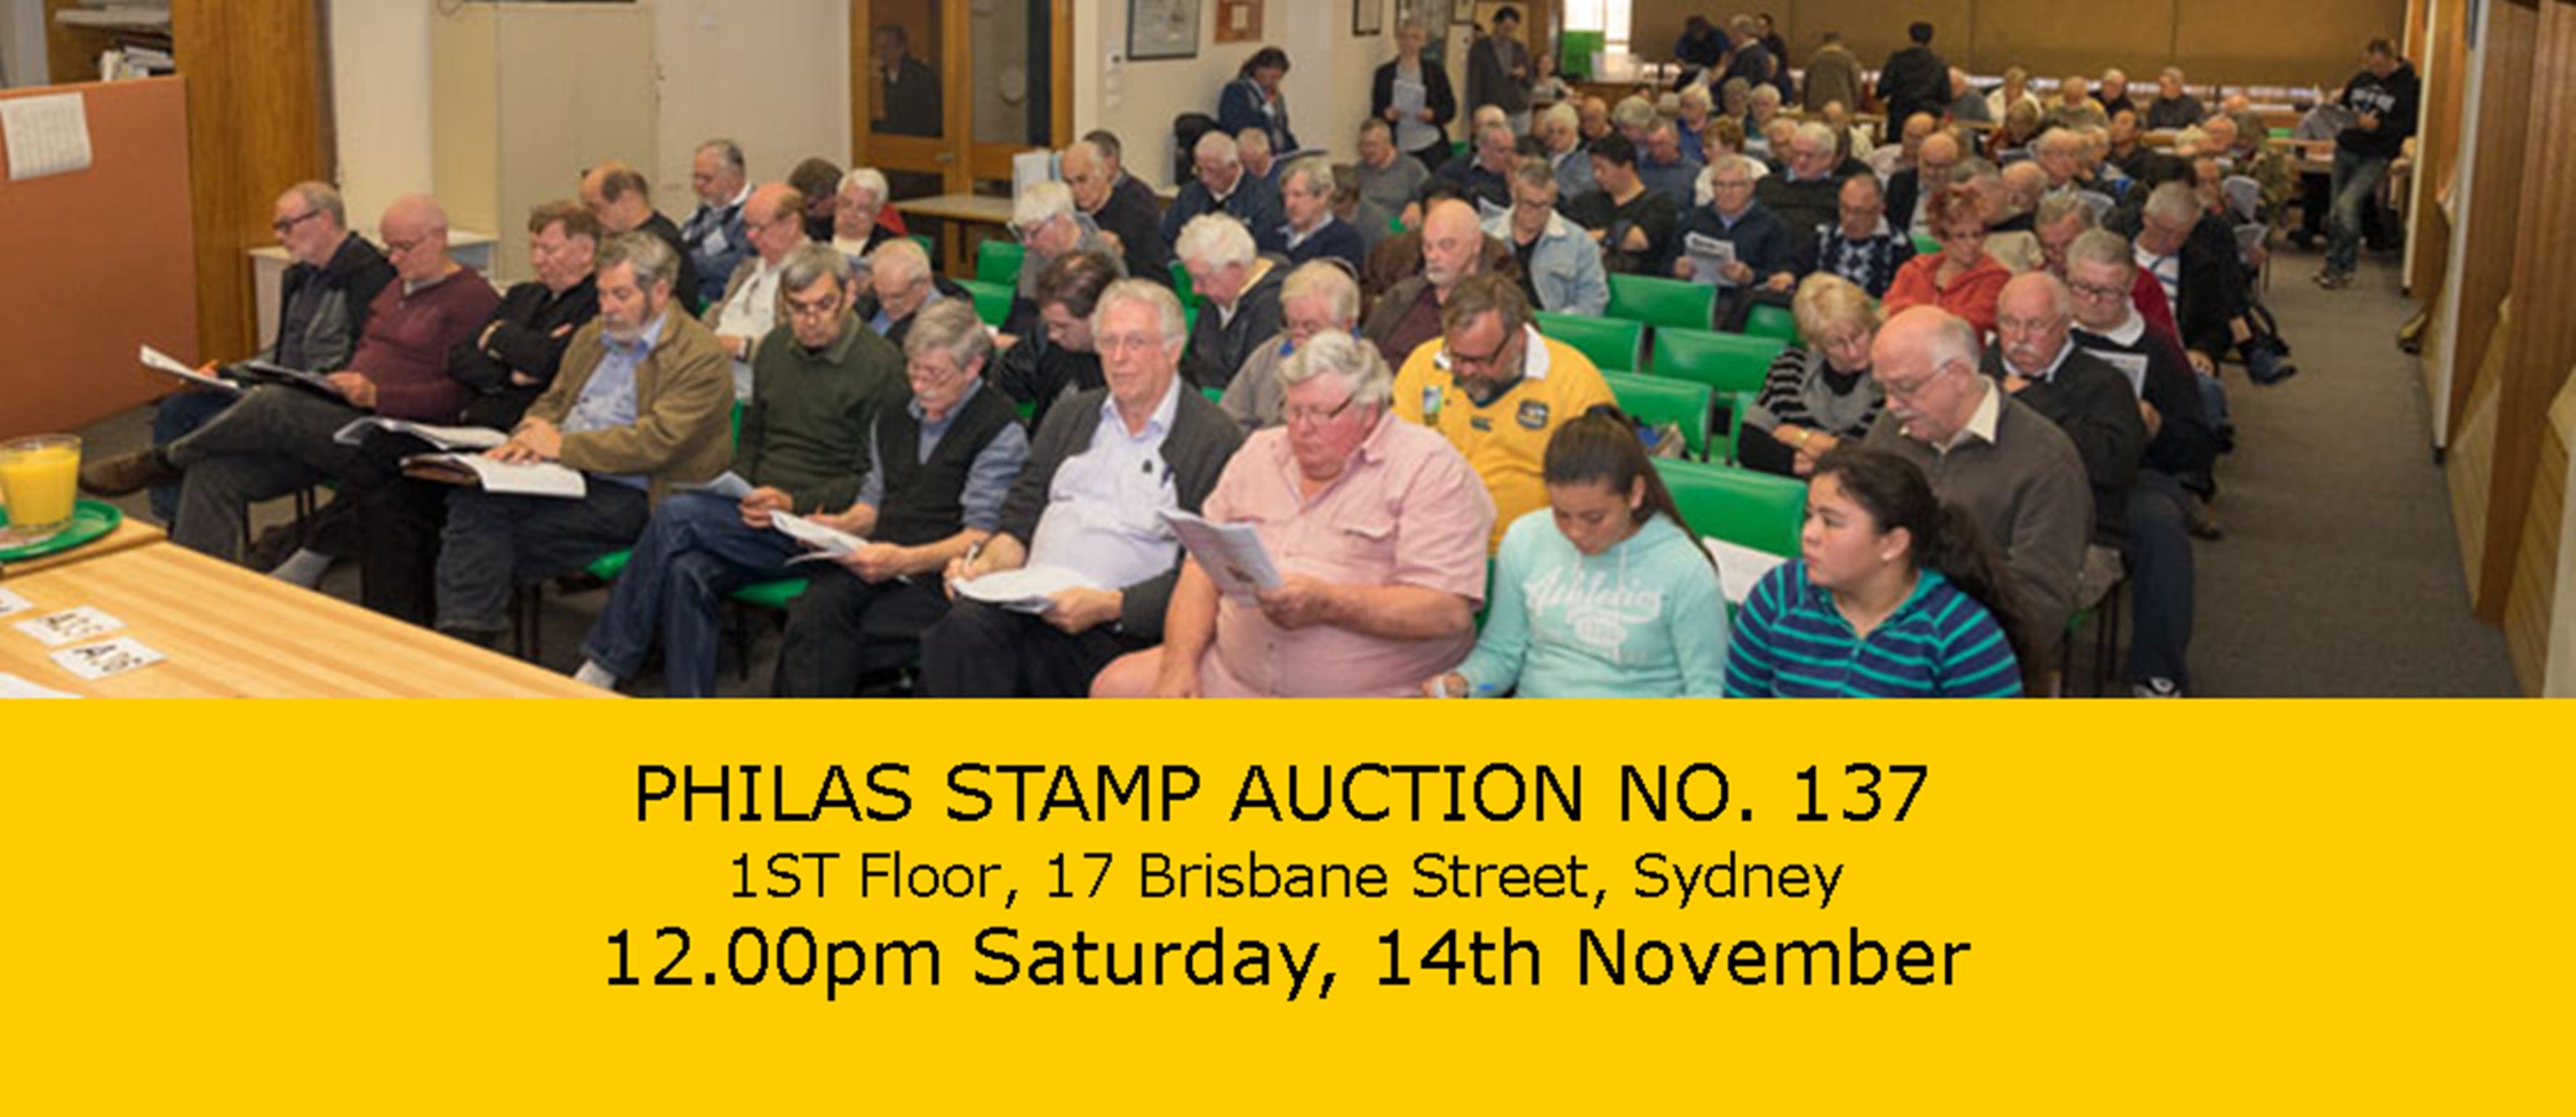 PHILAS Stamp Auction No. 137 - Accommodation Cooktown